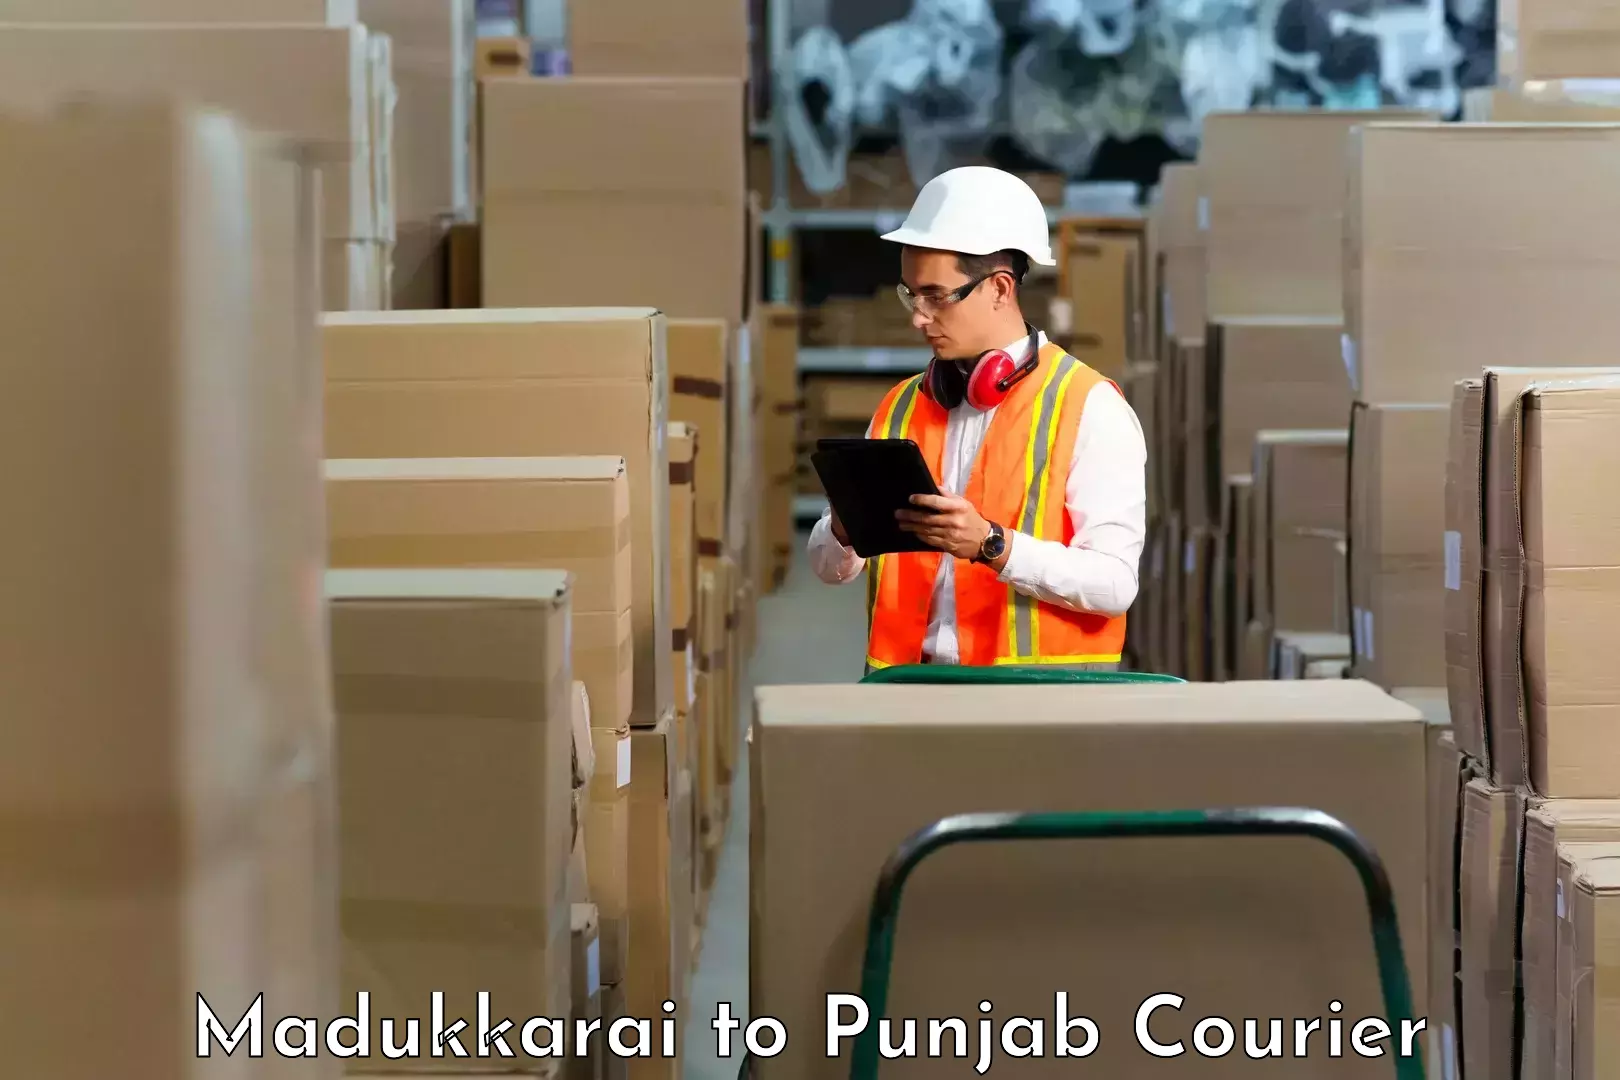 Global courier networks Madukkarai to Begowal